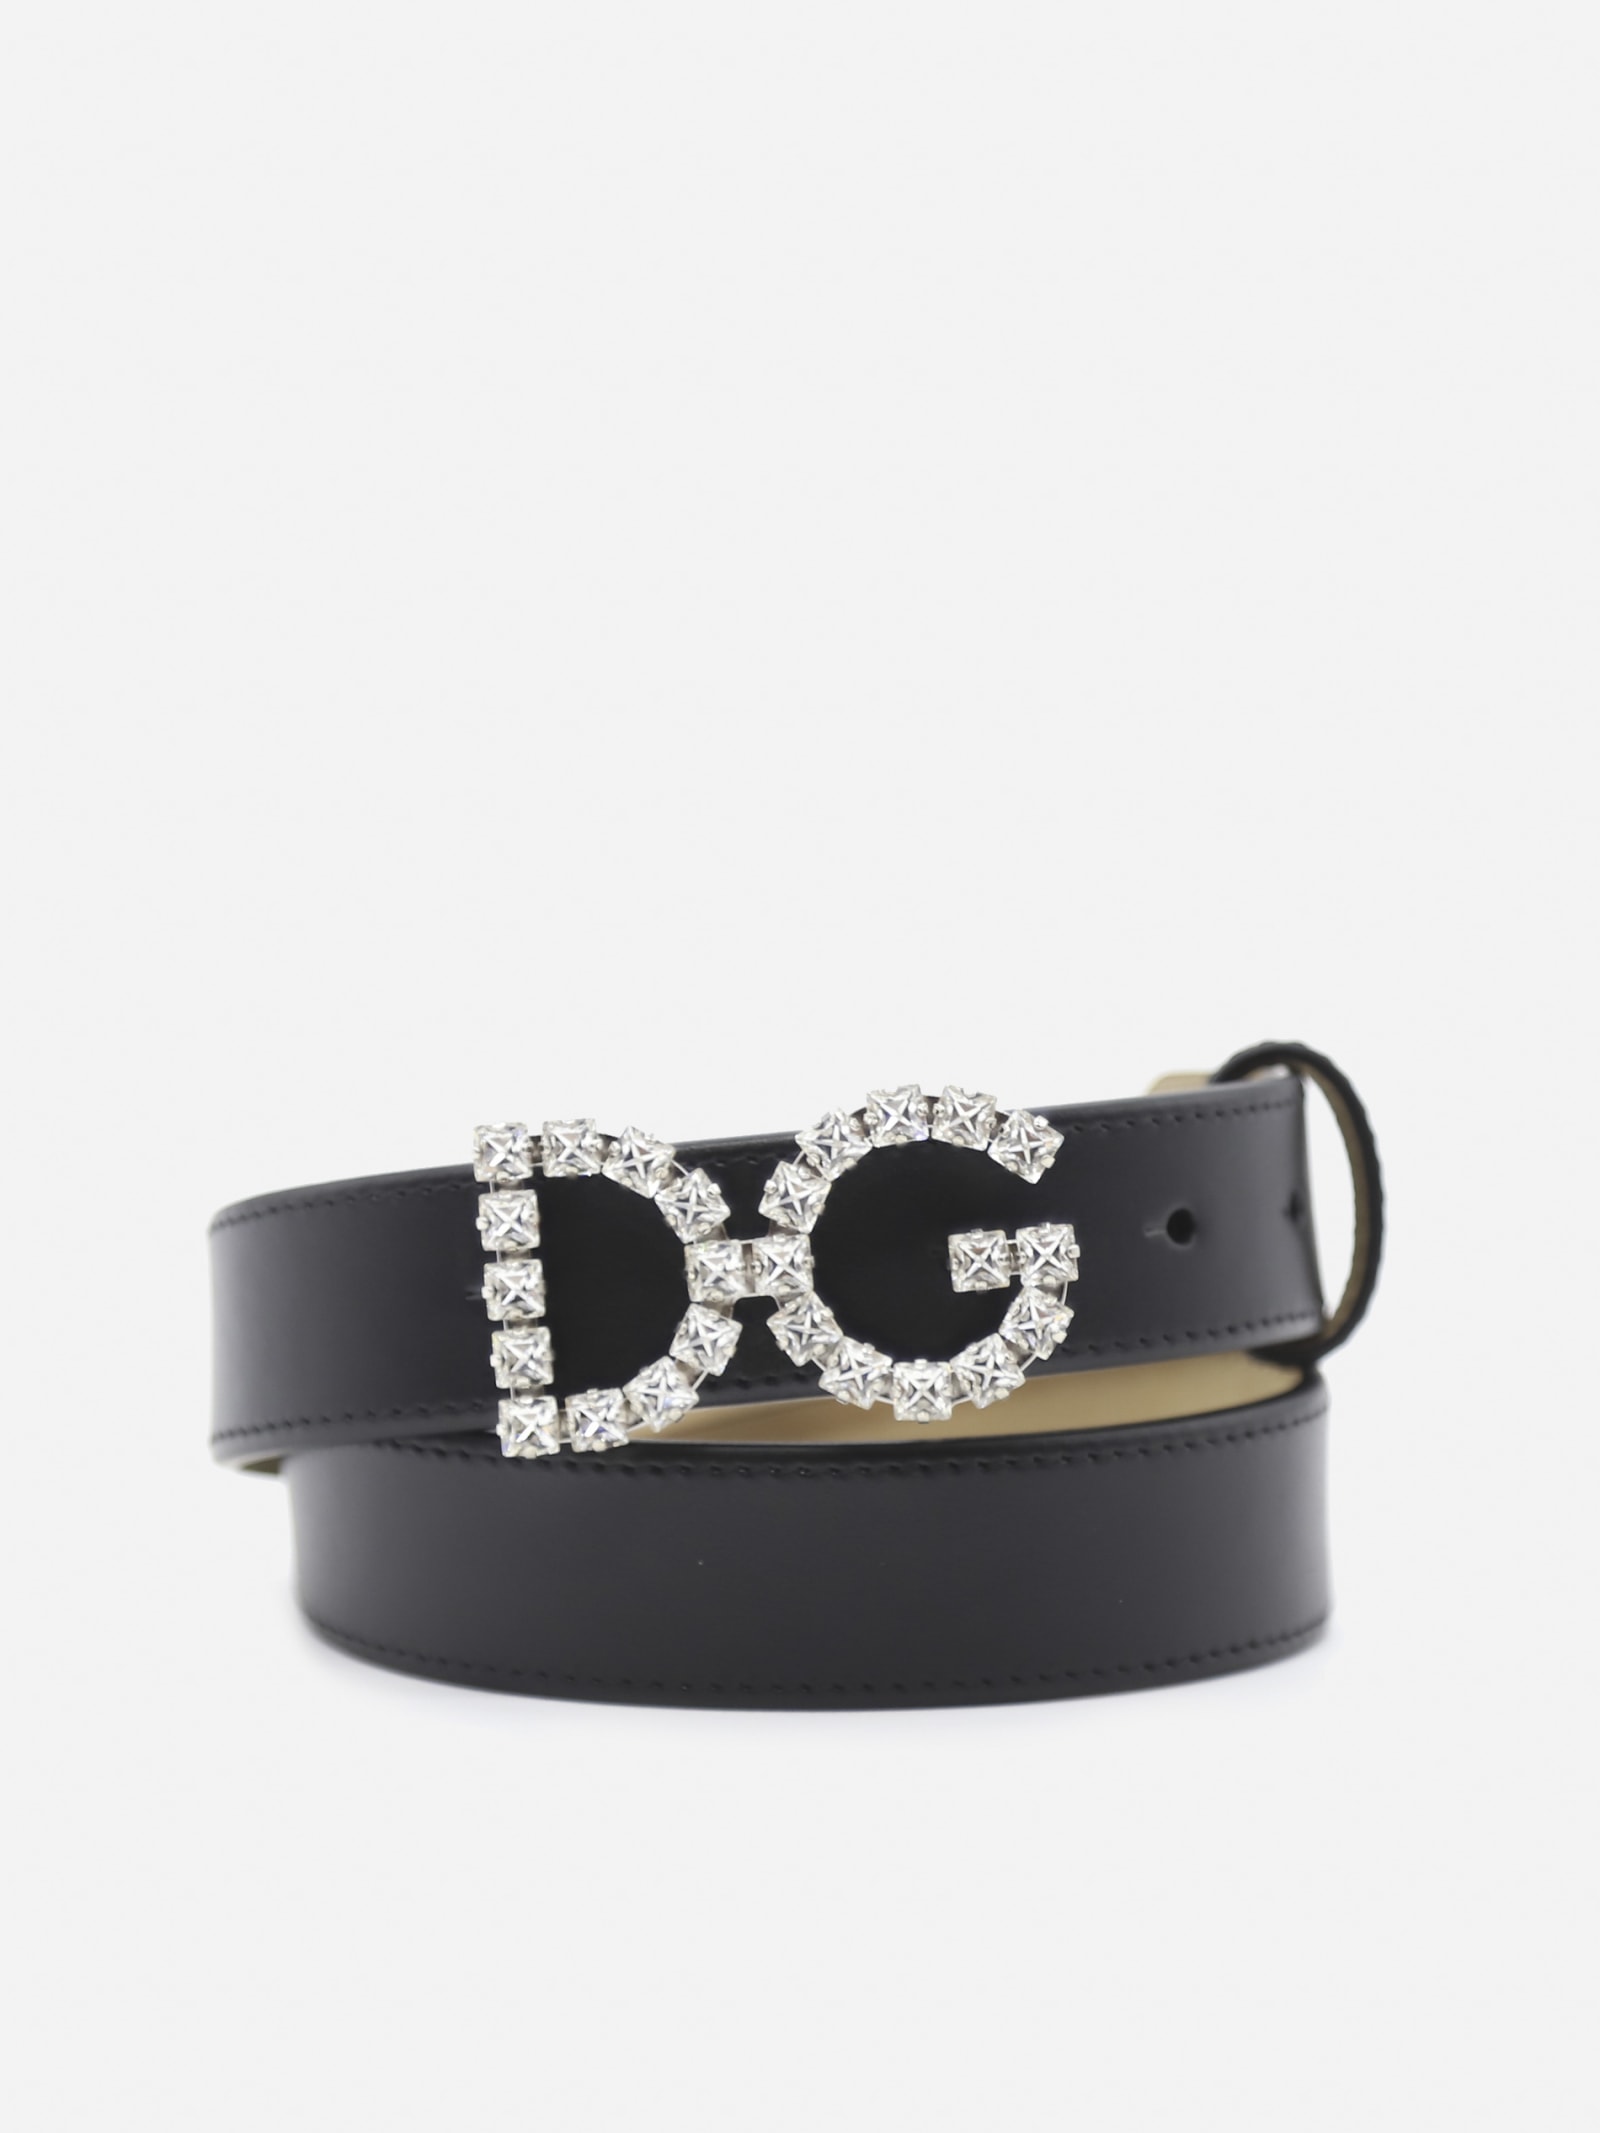 Dolce & Gabbana Leather Belt With Dg Buckle Decorated With Crystals